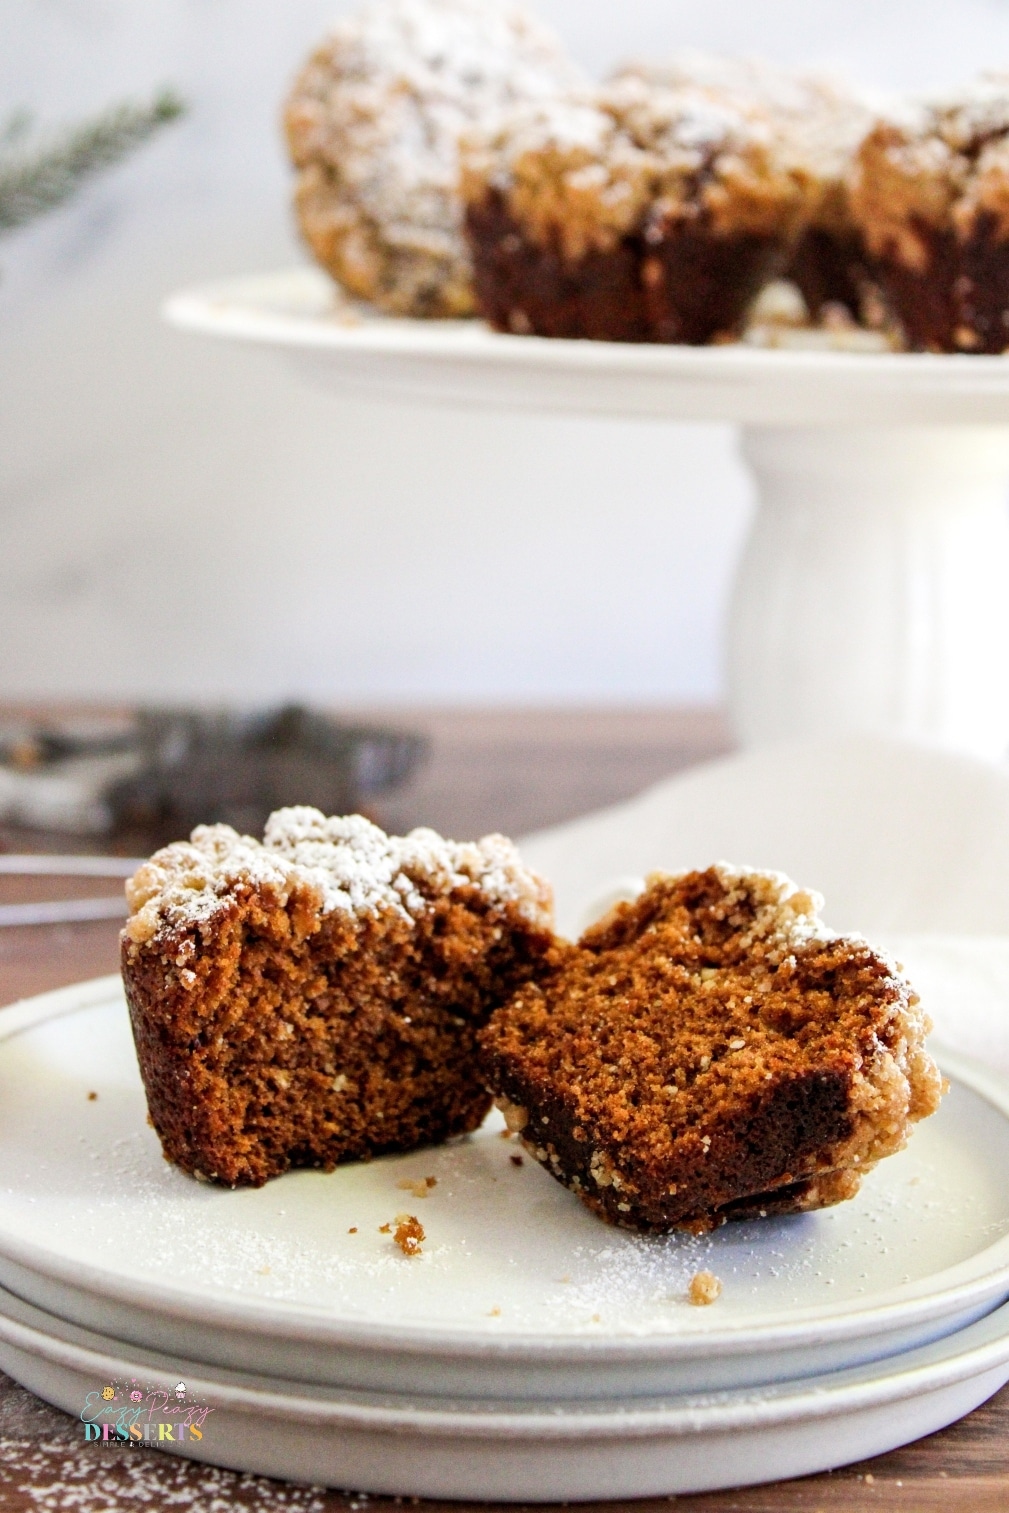 Ginger streusel muffins cut in half to expose the inside